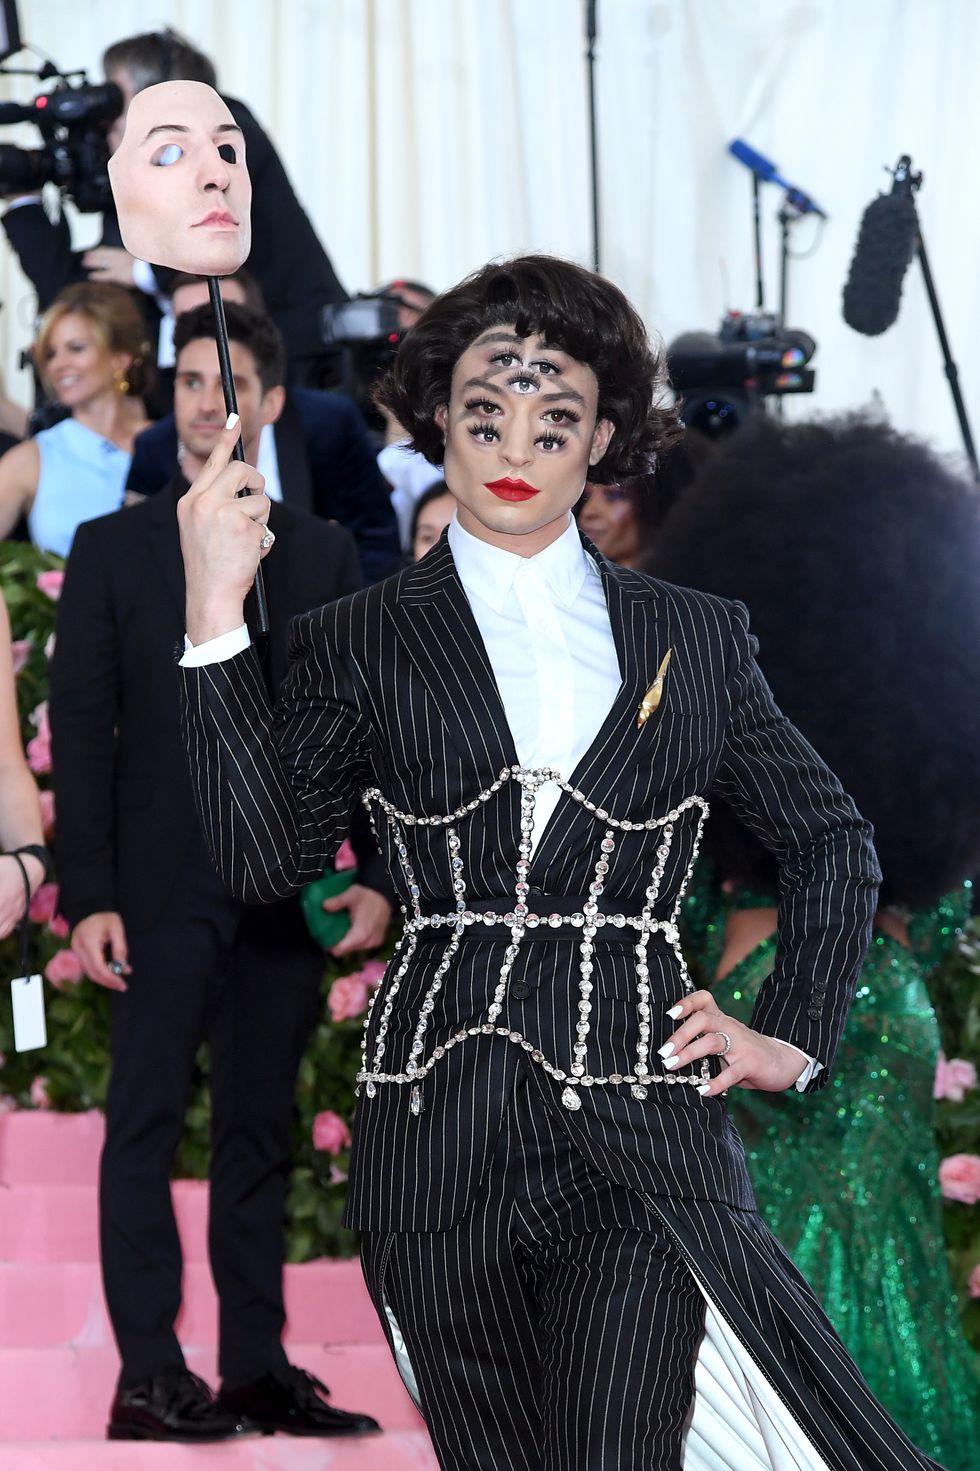 new york, new york   may 06 ezra miller arrives for the 2019 met gala celebrating camp notes on fashion at the metropolitan museum of art on may 06, 2019 in new york city photo by karwai tanggetty images